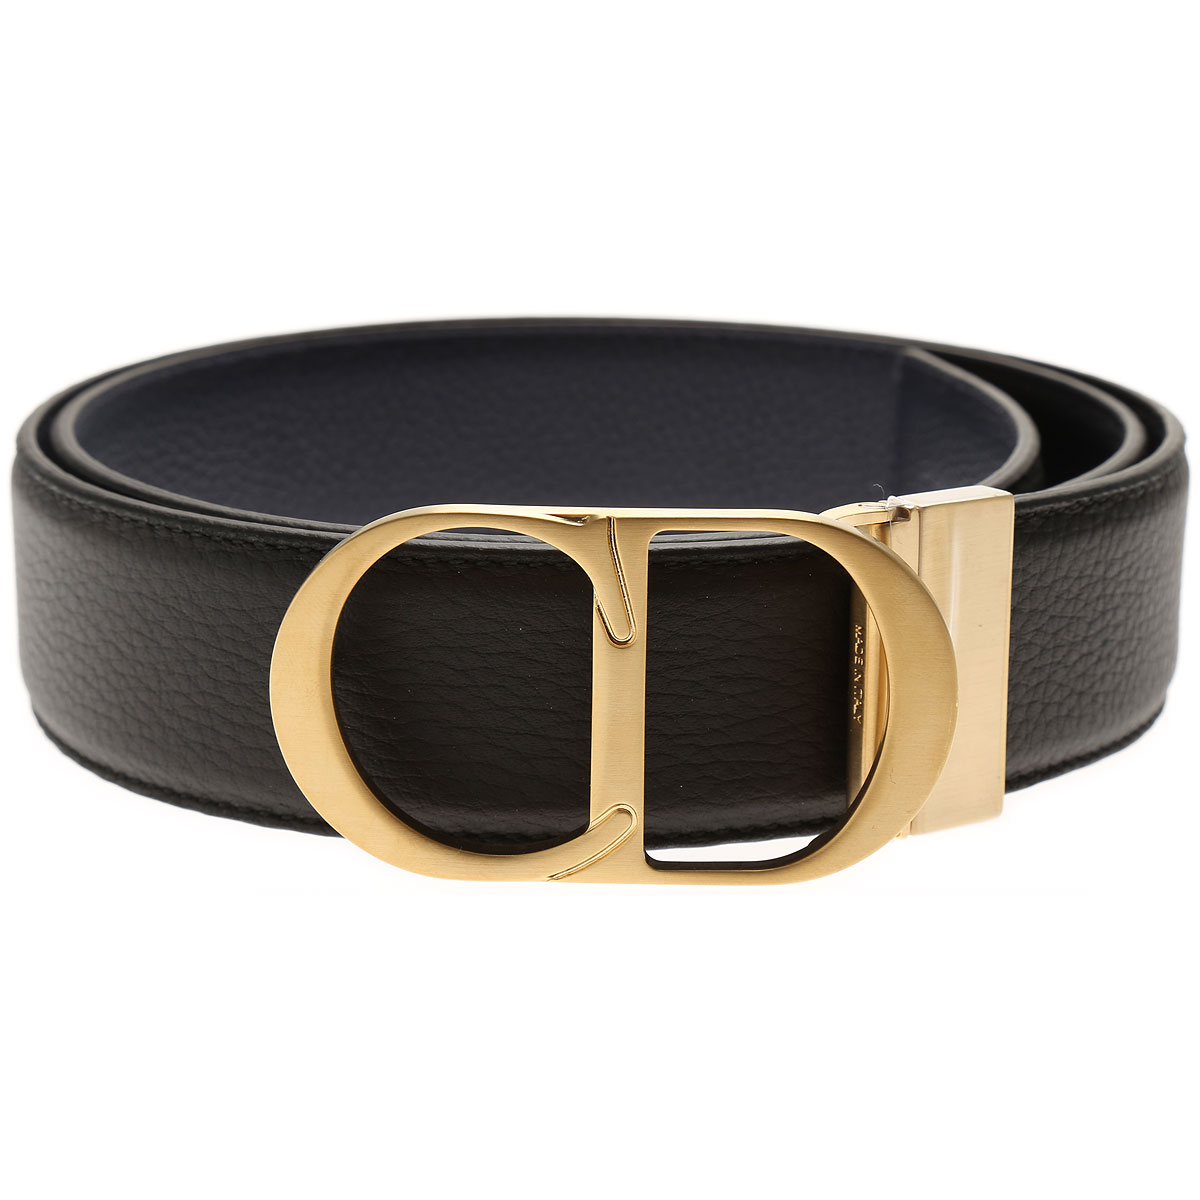 Mens Belts Christian Dior, Style code: 40440s-tab-965